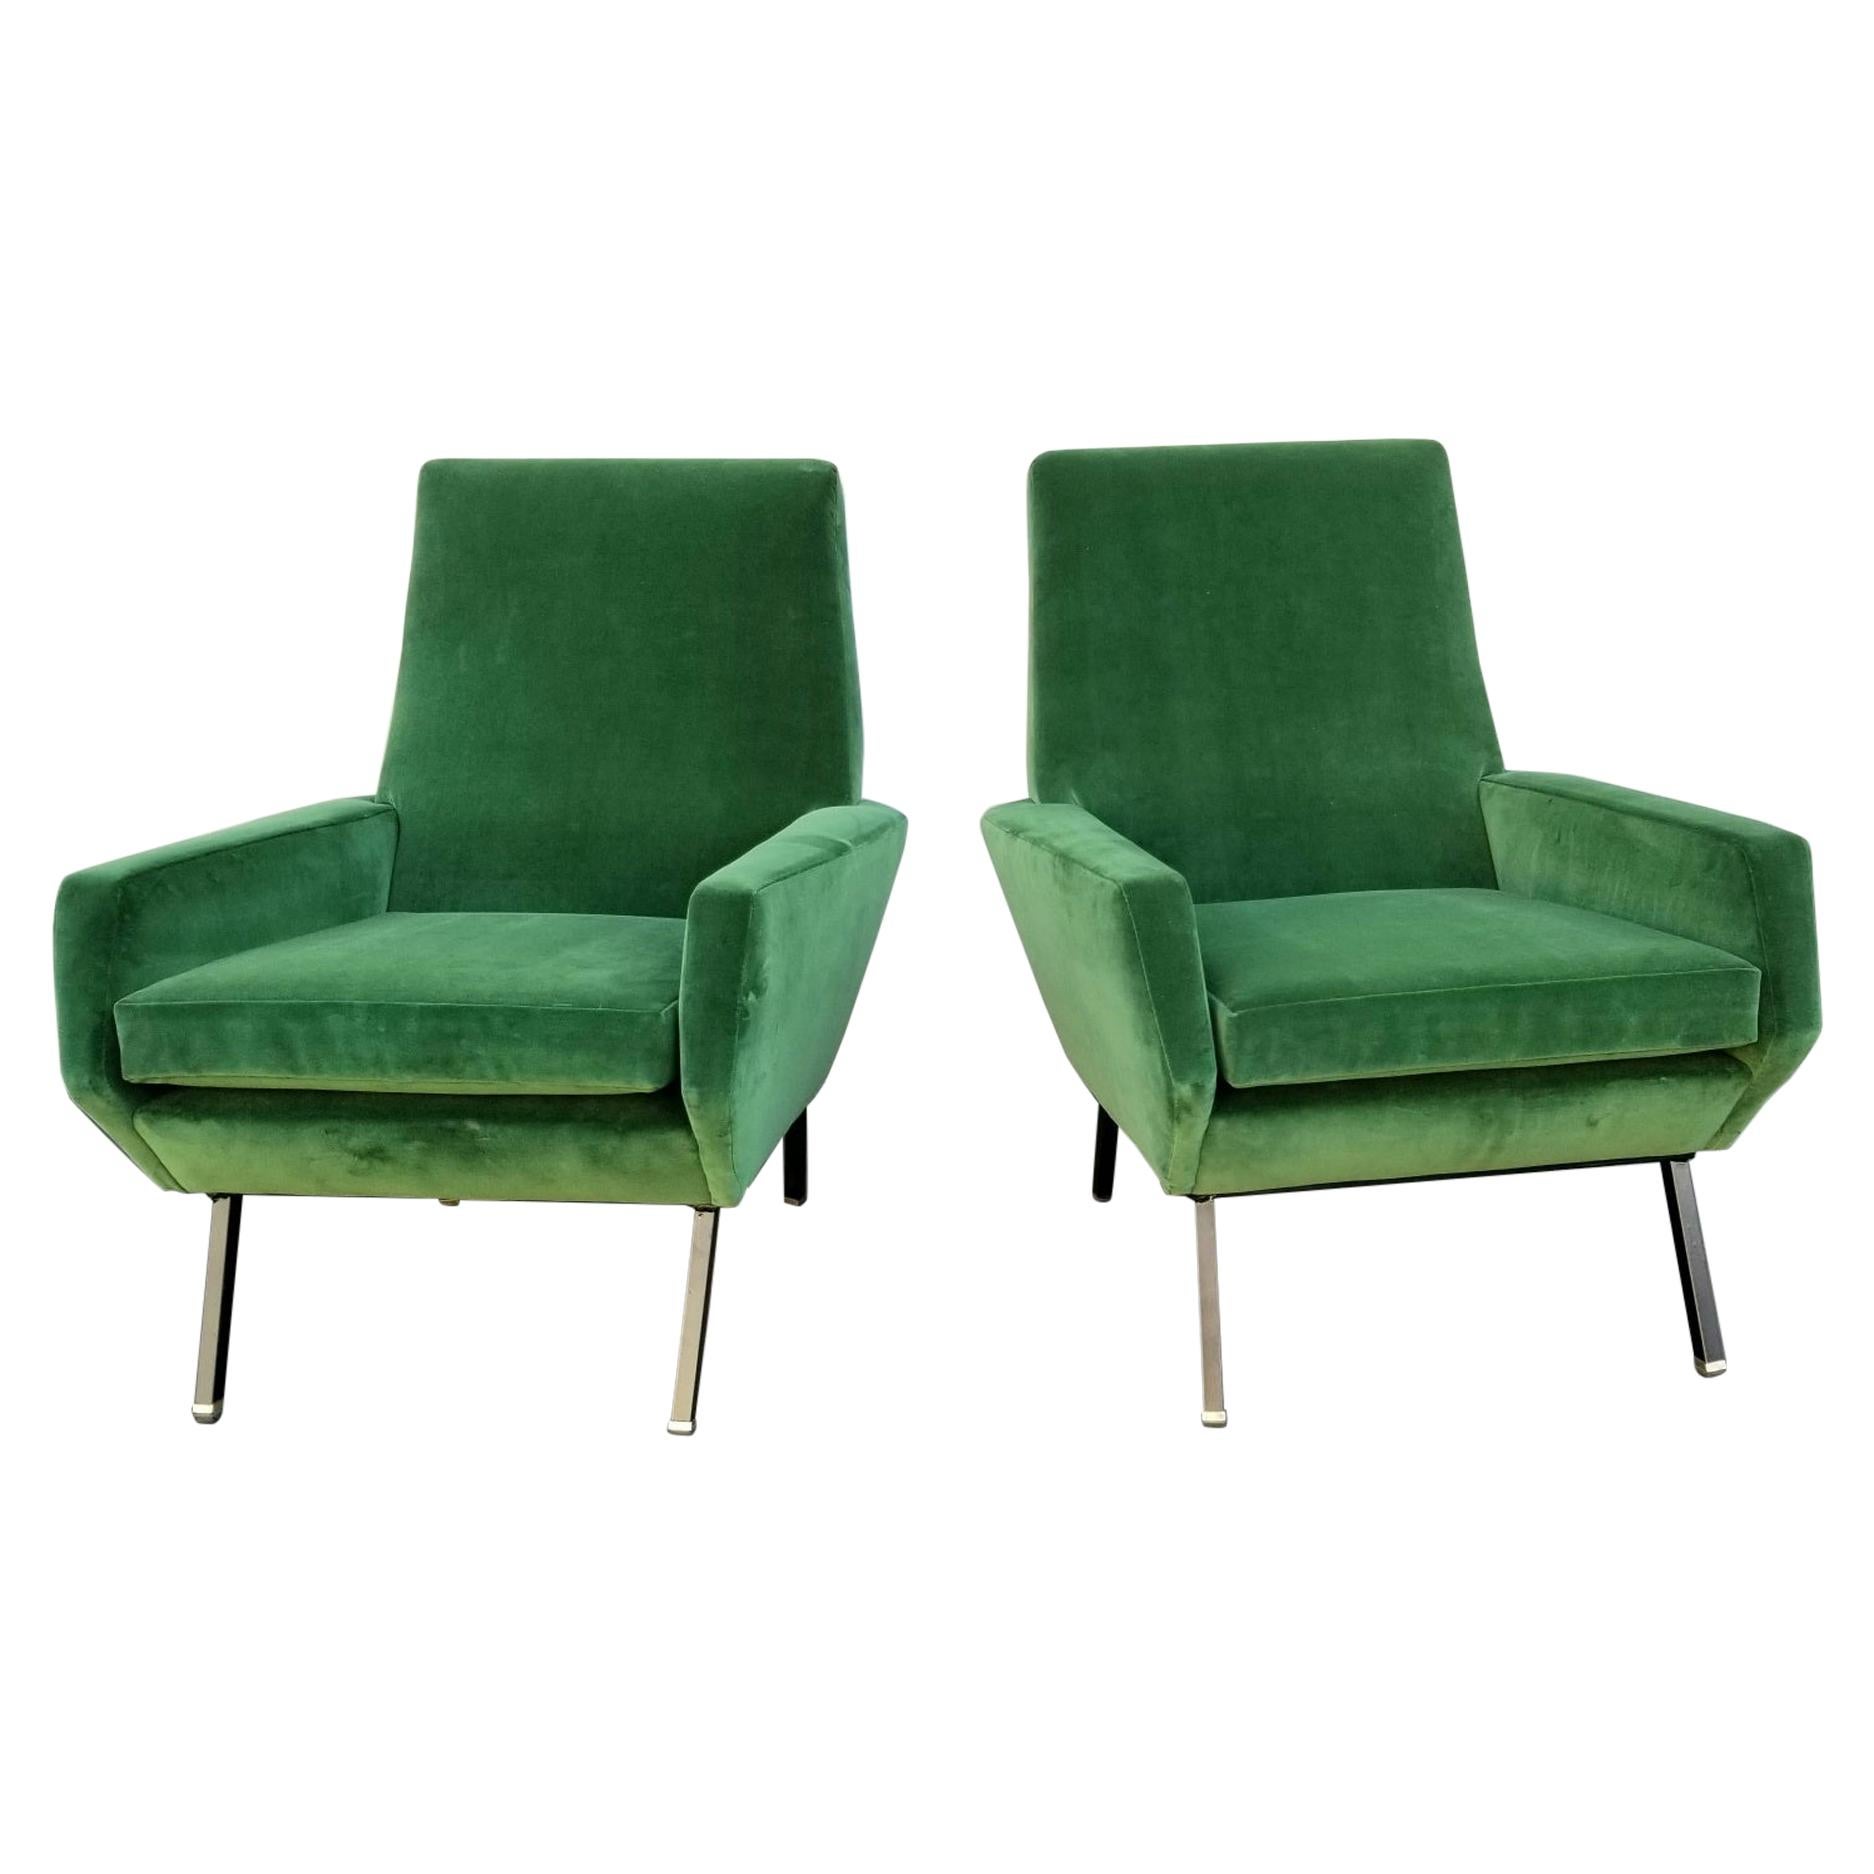 Italian, 1950s Lounge Chairs Attributed to Arflex-Meda